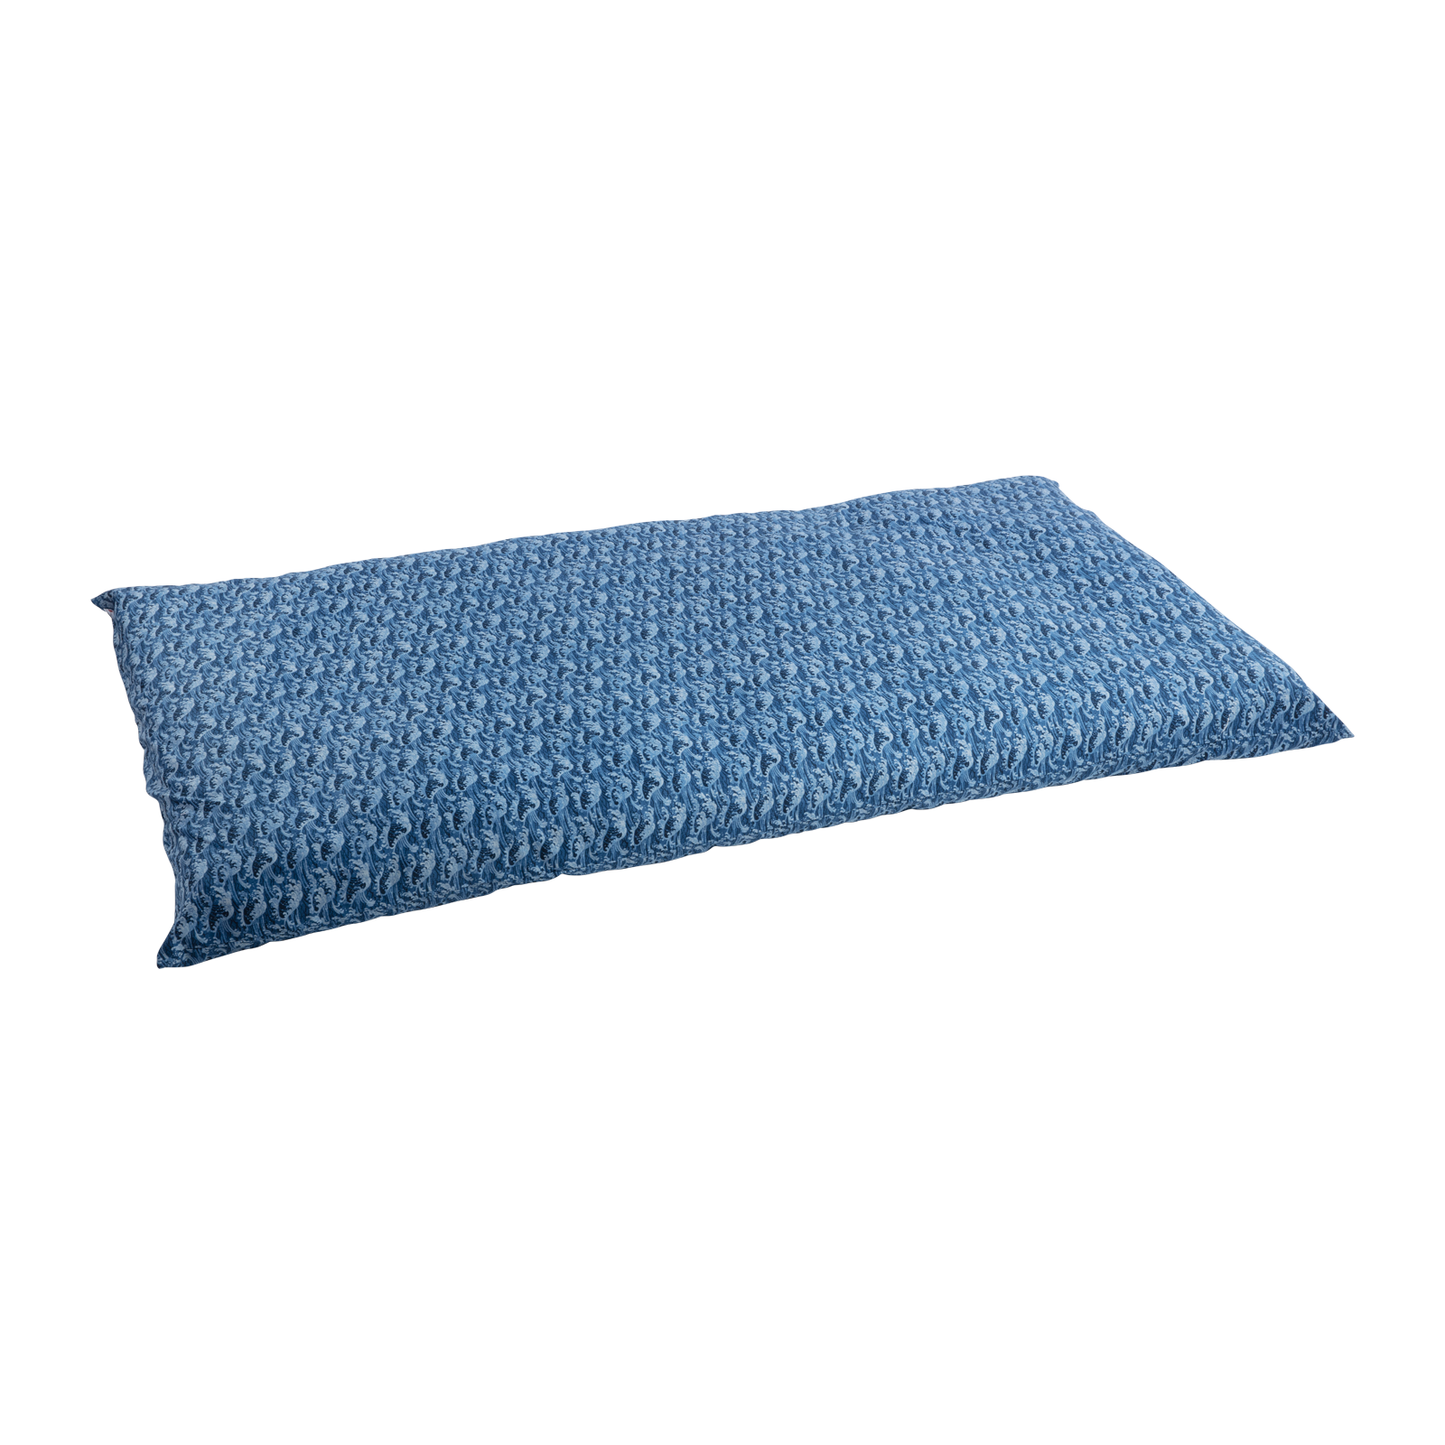 Shiki Futon Tidal Wave Blue Removable COVER ONLY